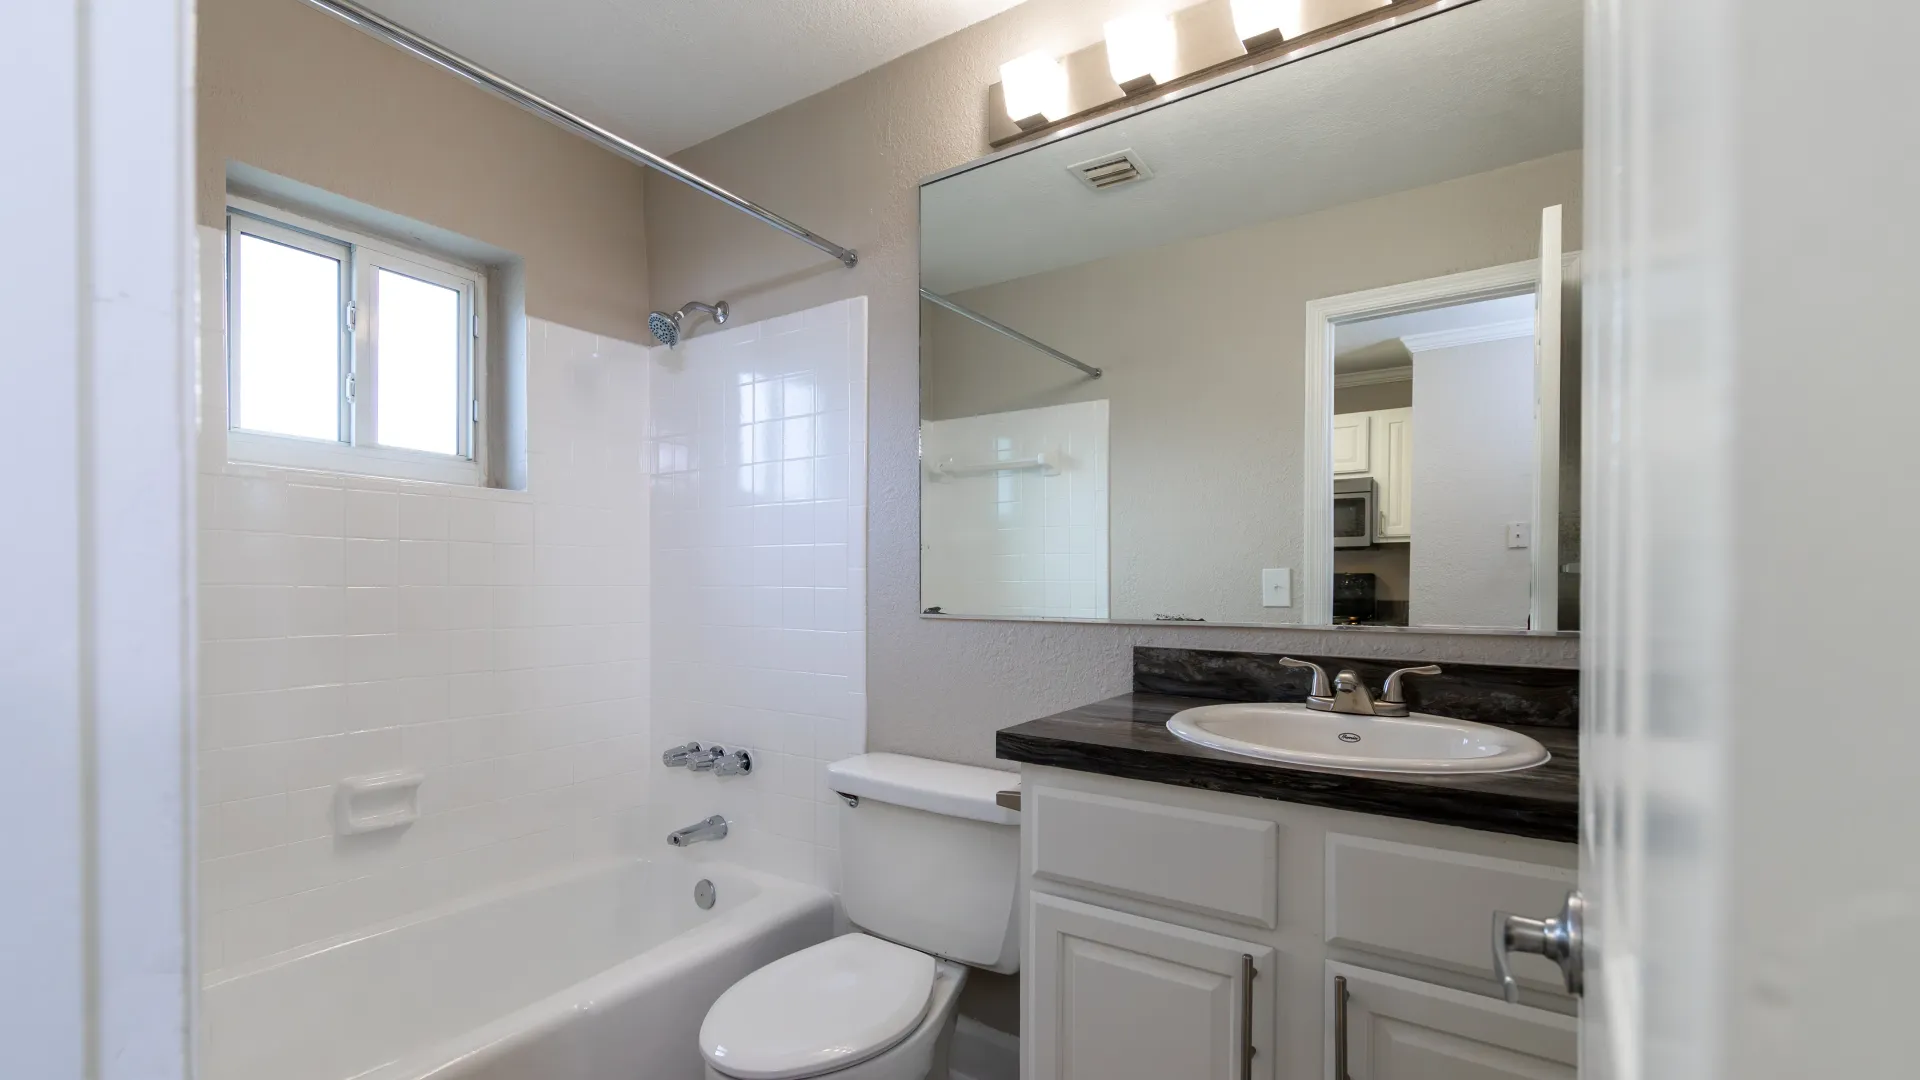 A tranquil bathroom space with a windowed shower/tub combo, white tile surround, a black fusion countertop, an expansive mirror with lighted vanity.